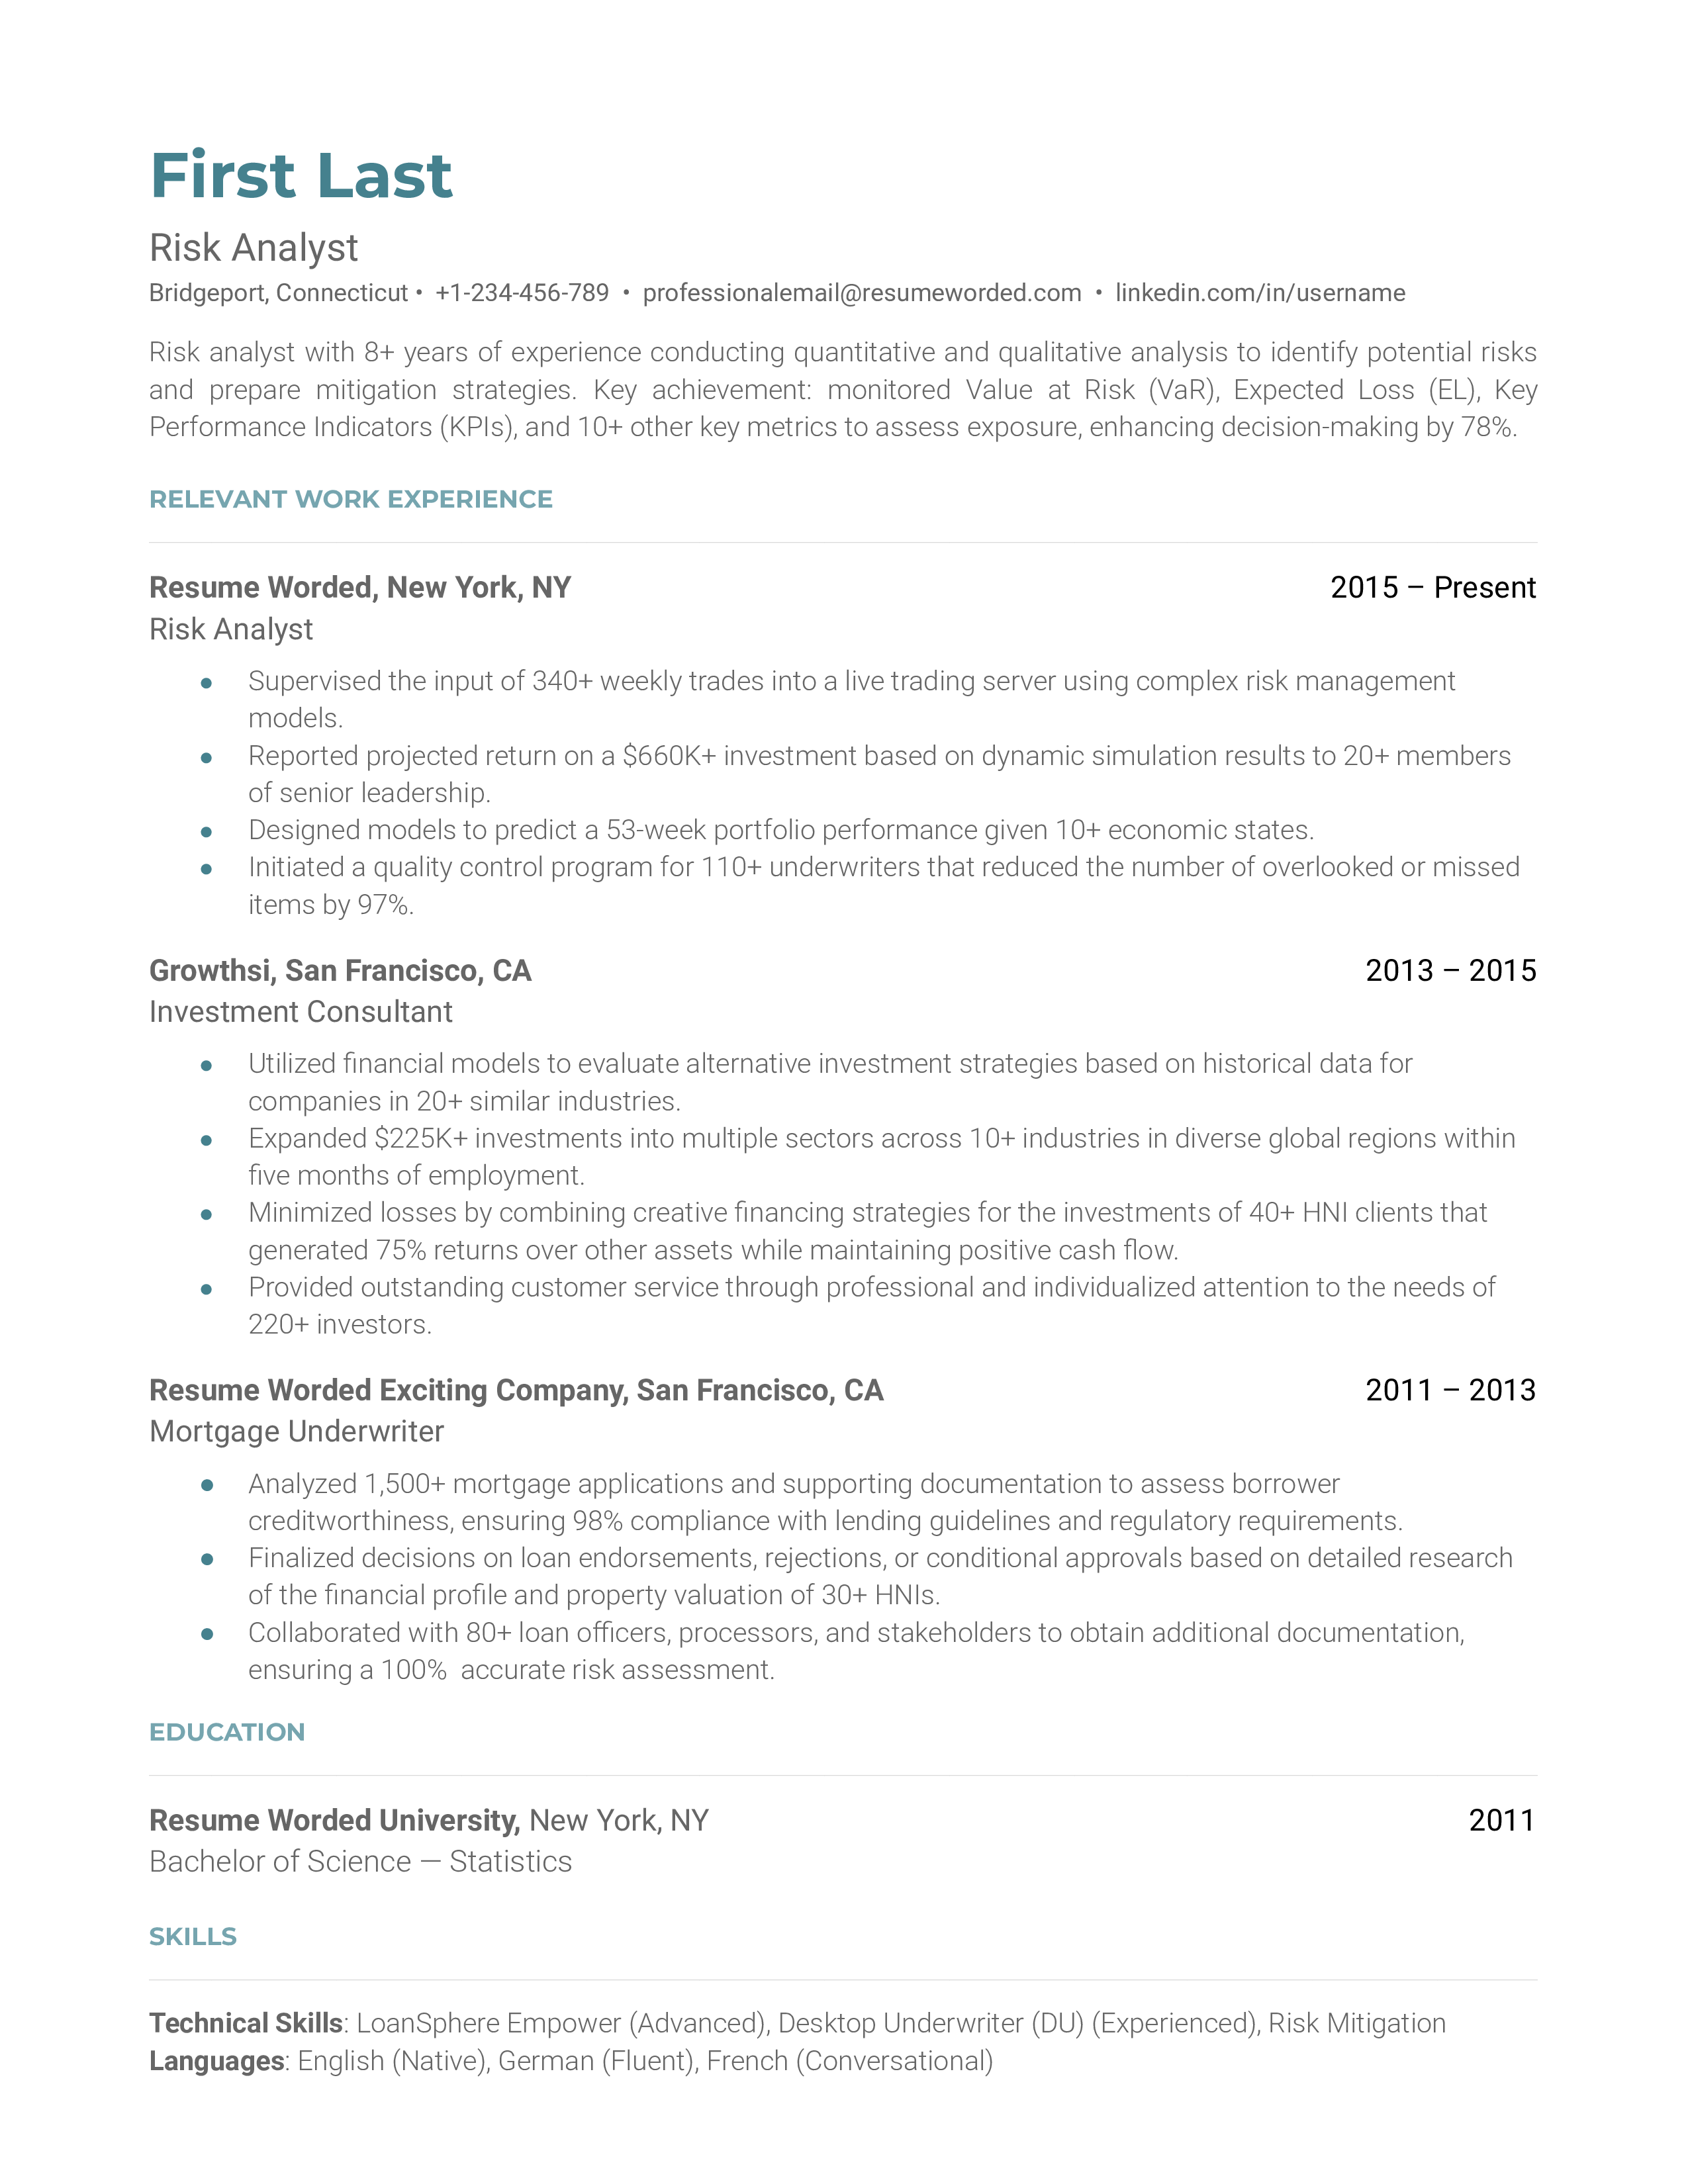 A professional CV crafted for a Risk Analyst role, showcasing relevant skills and experiences.